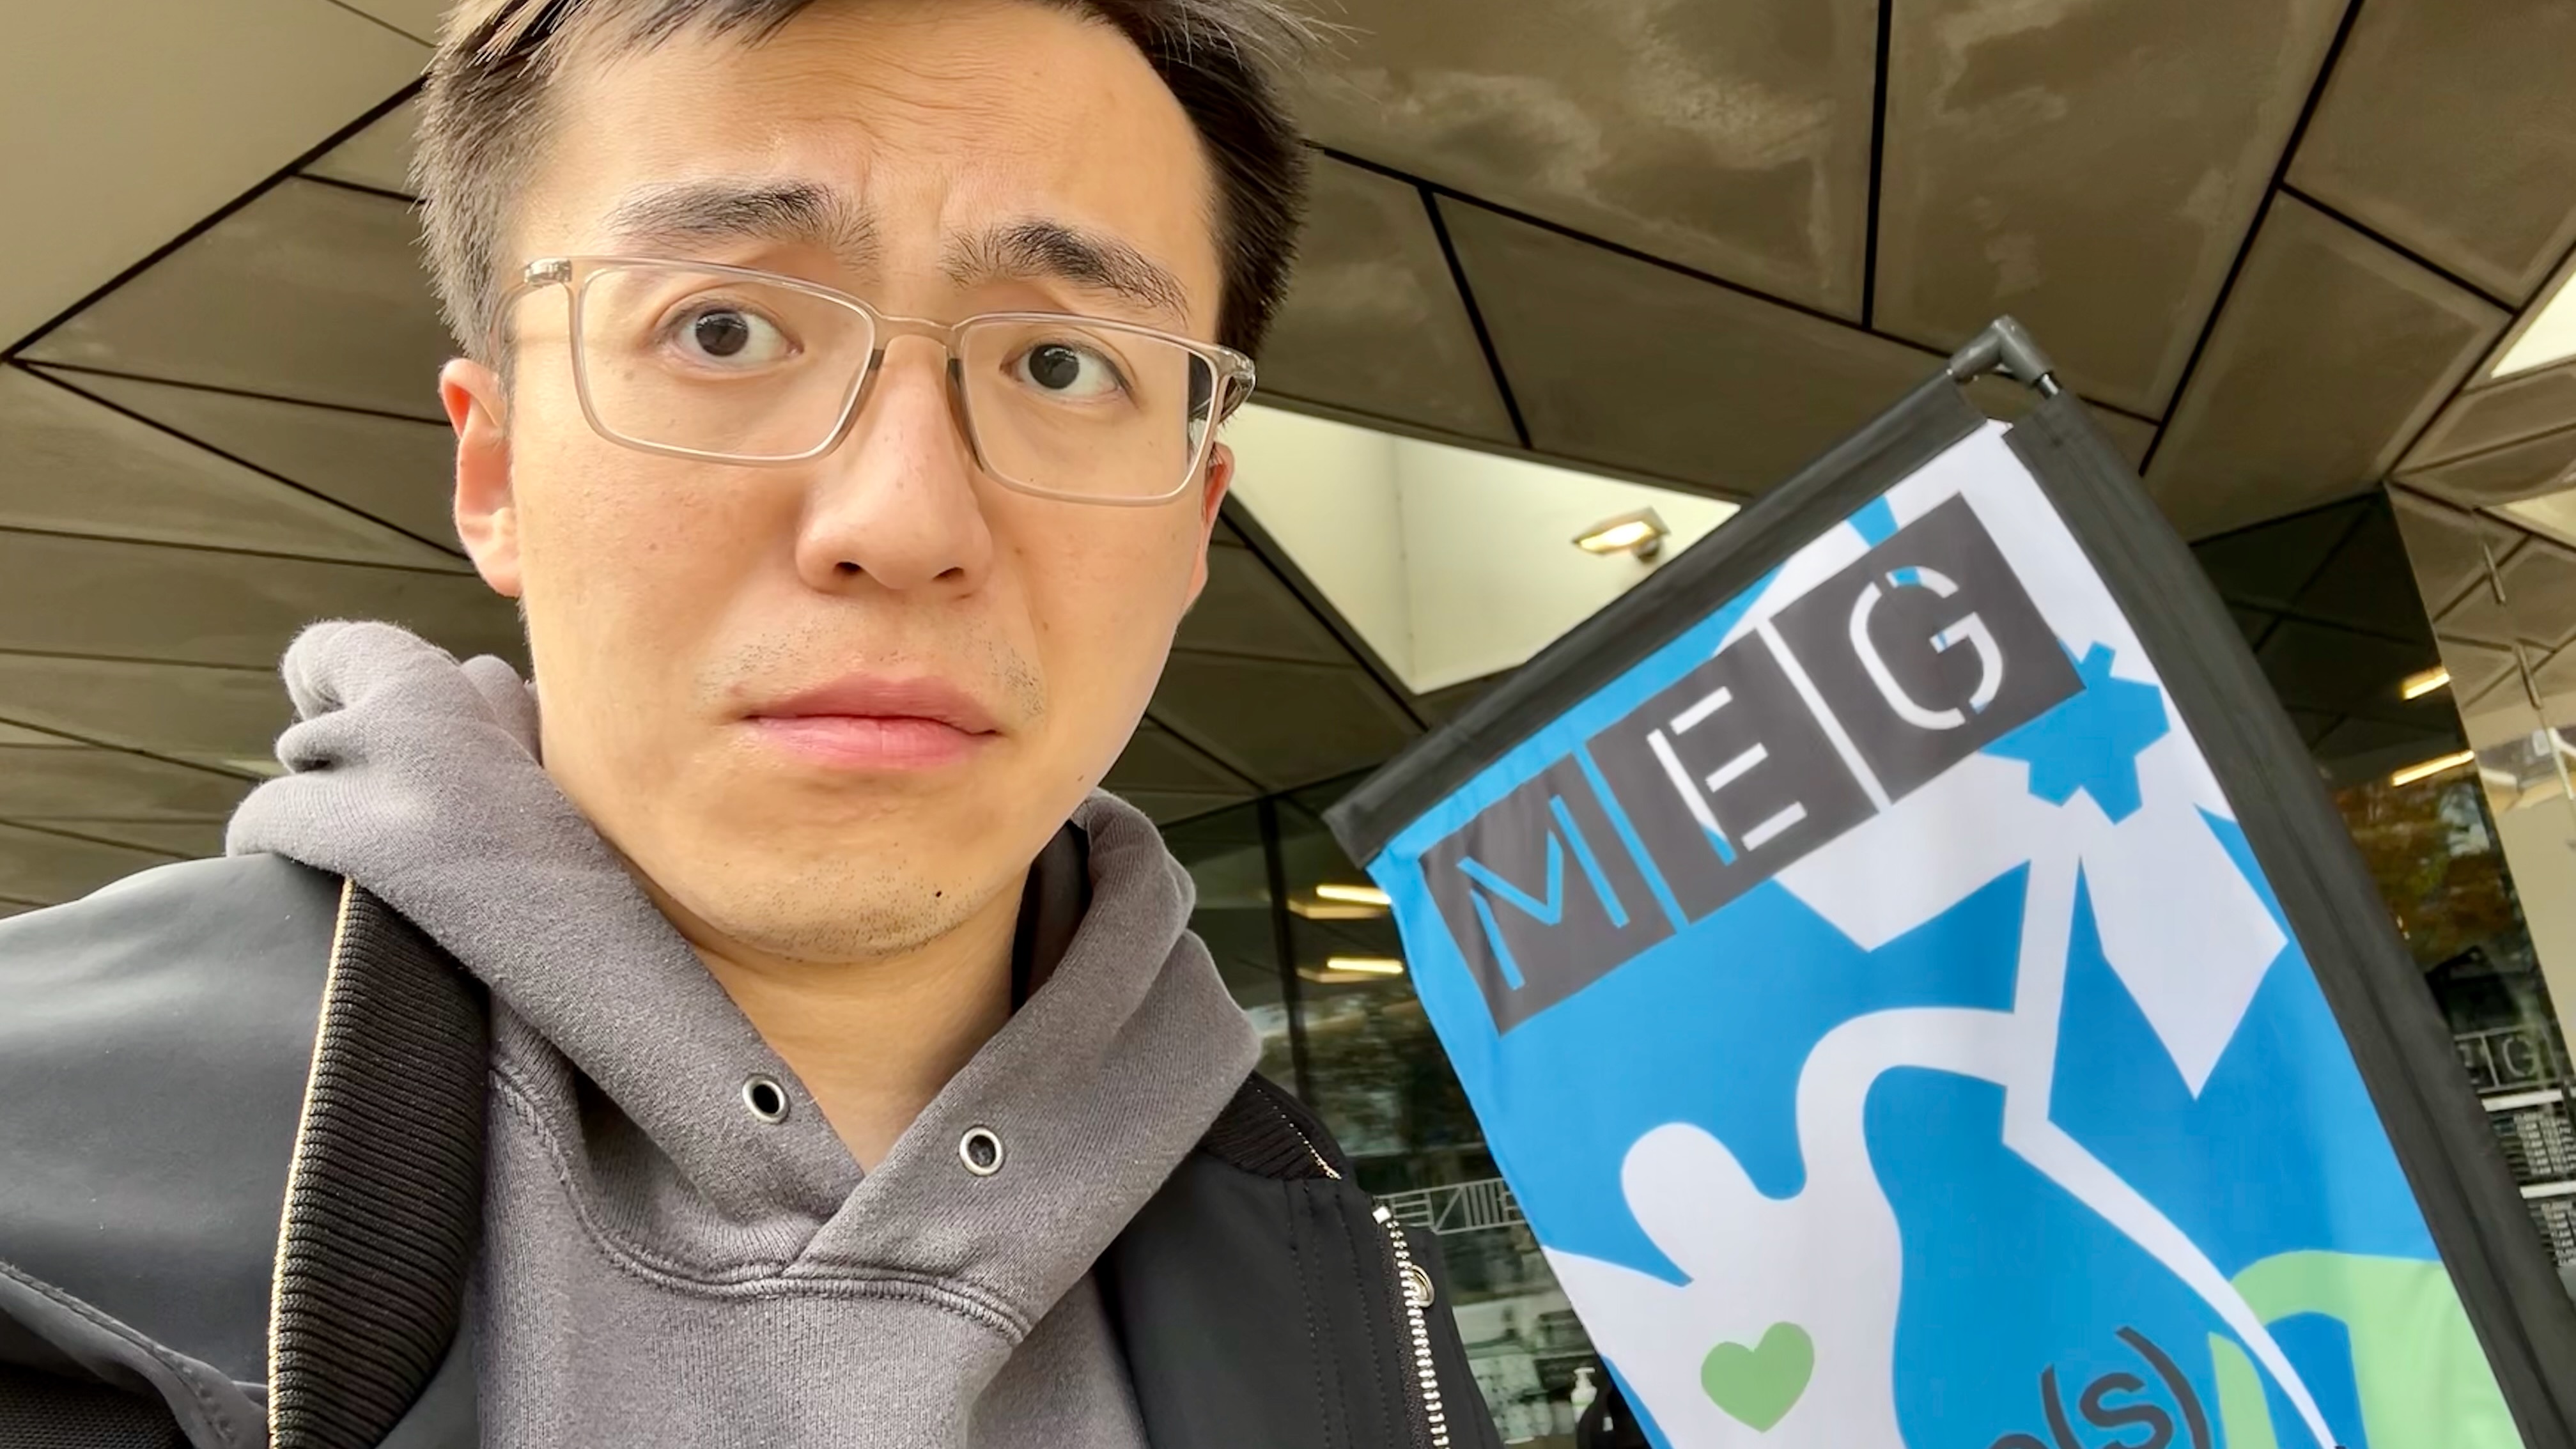 Selfie in front of young man looking theatrically quizzical, in front of a sign that says "MEG".